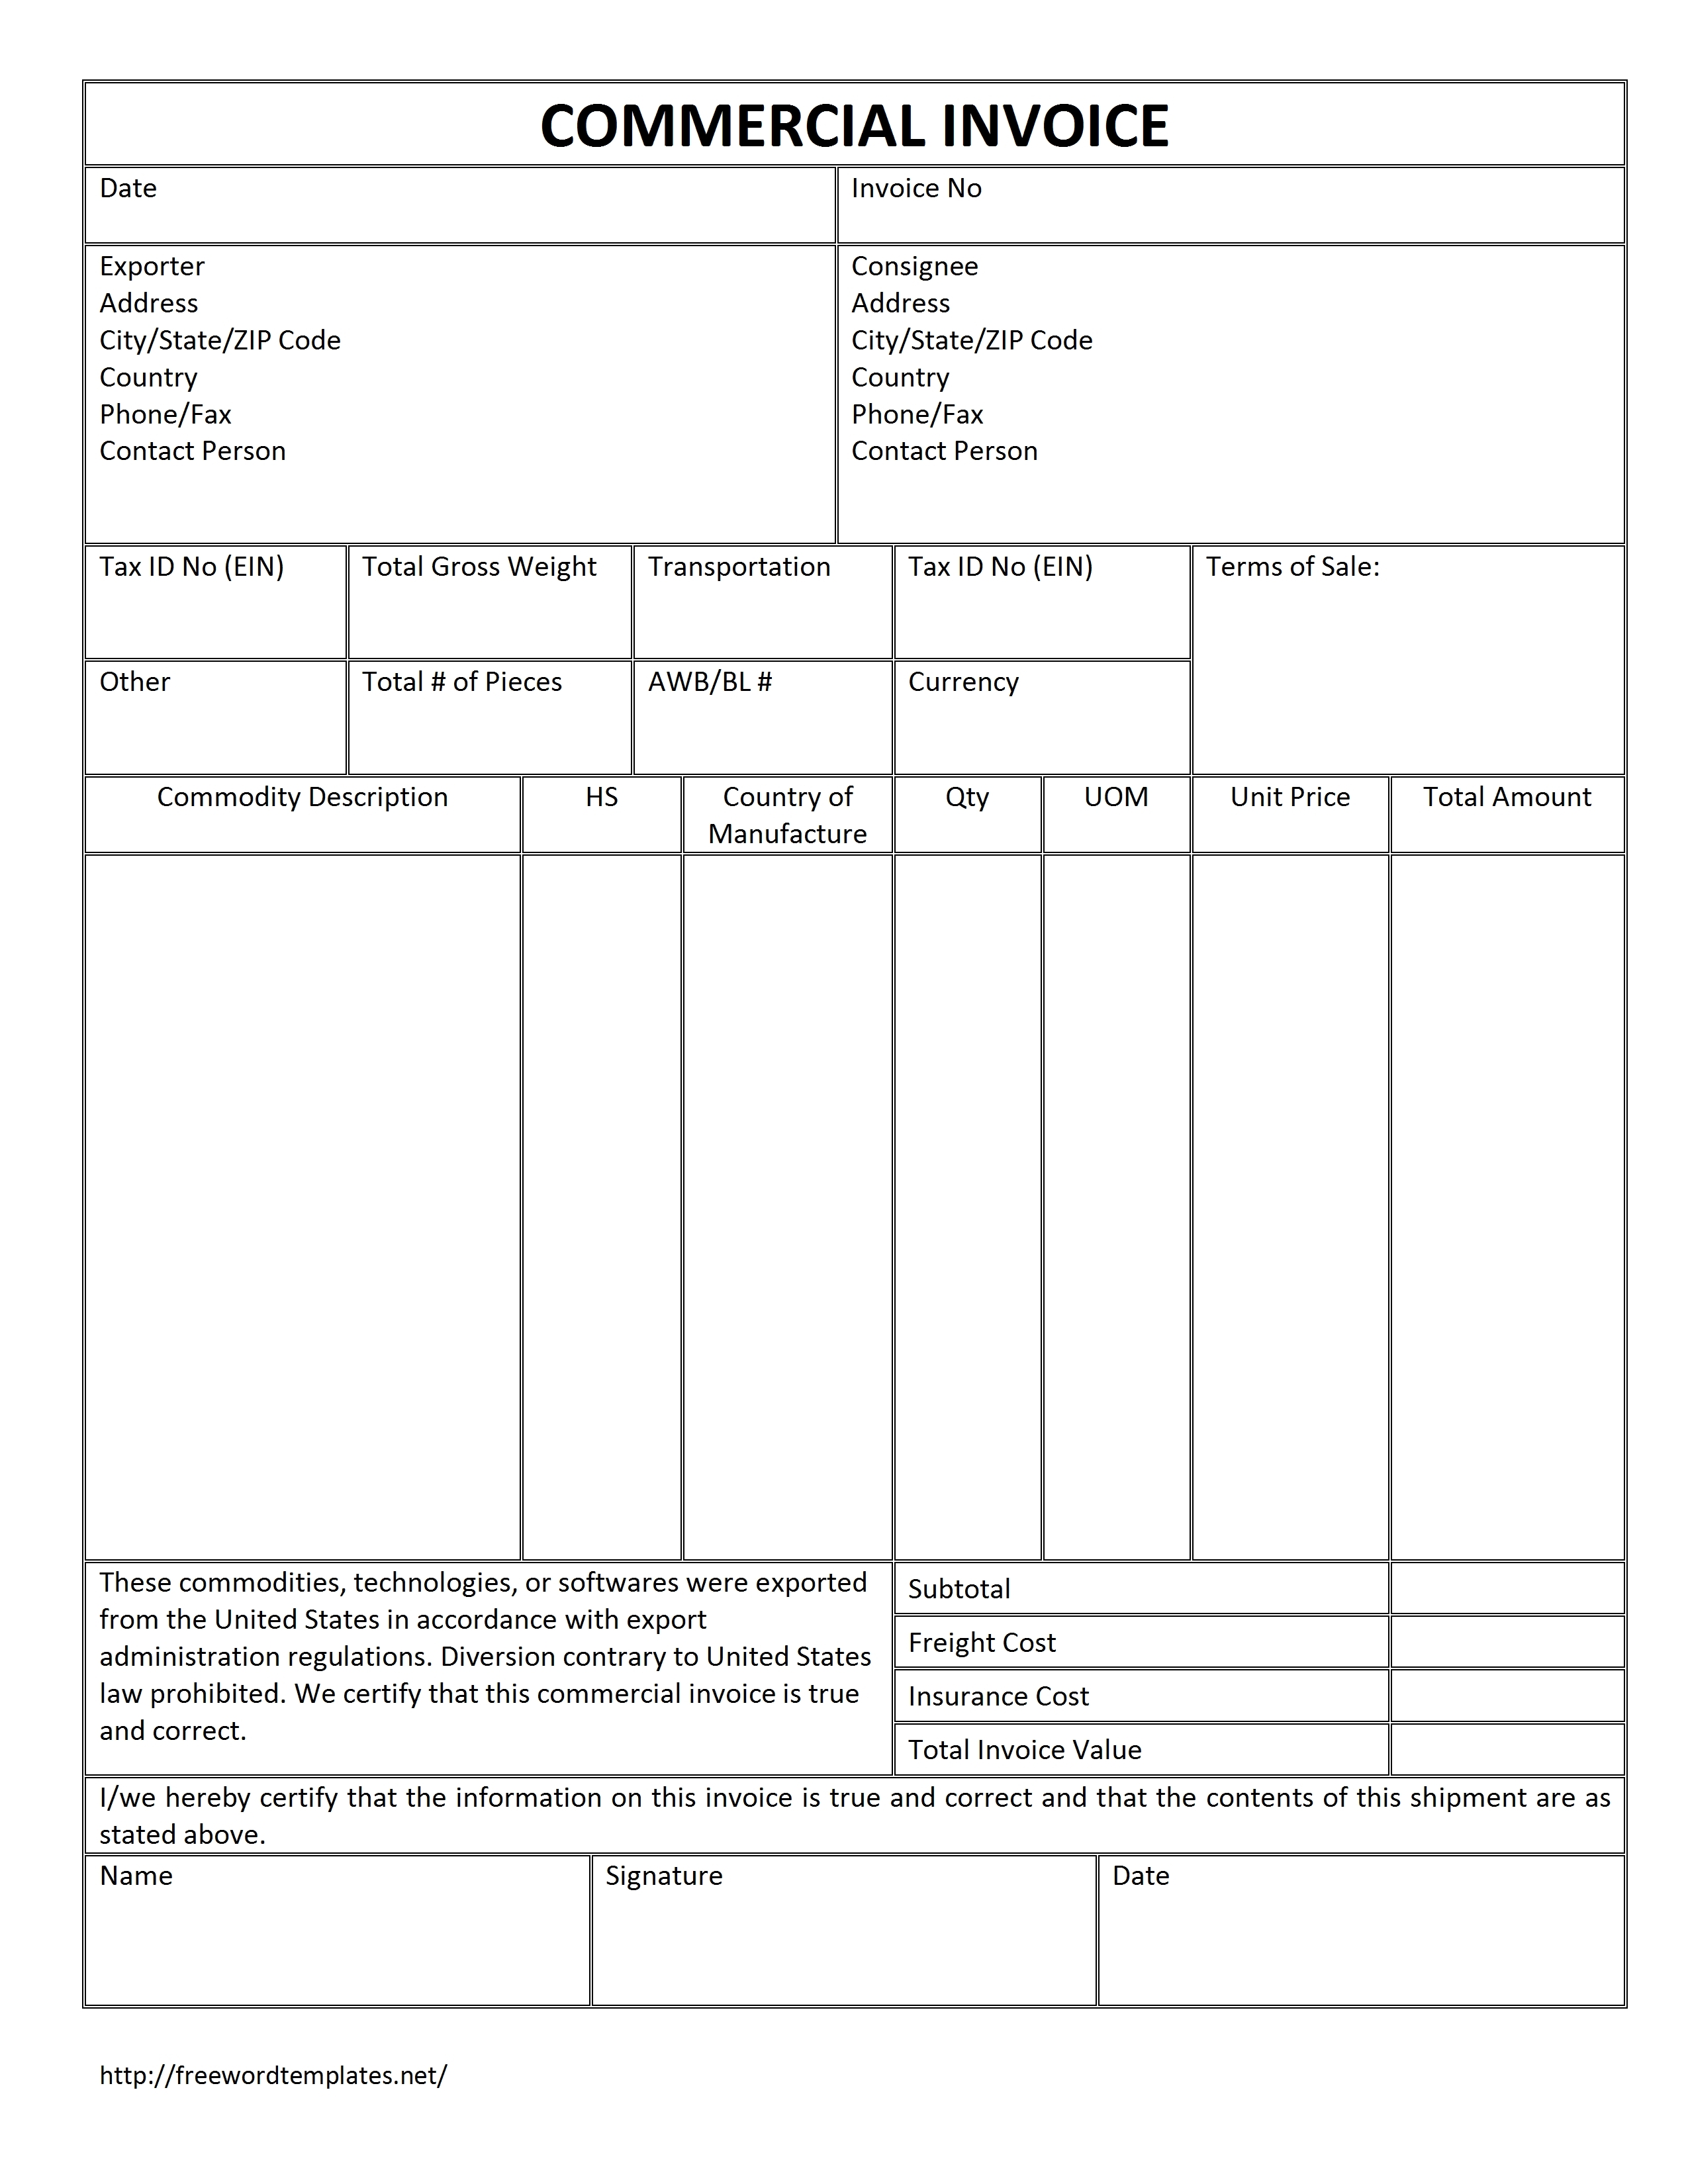 customs commercial invoice template apcc2017 commercial invoice form customs